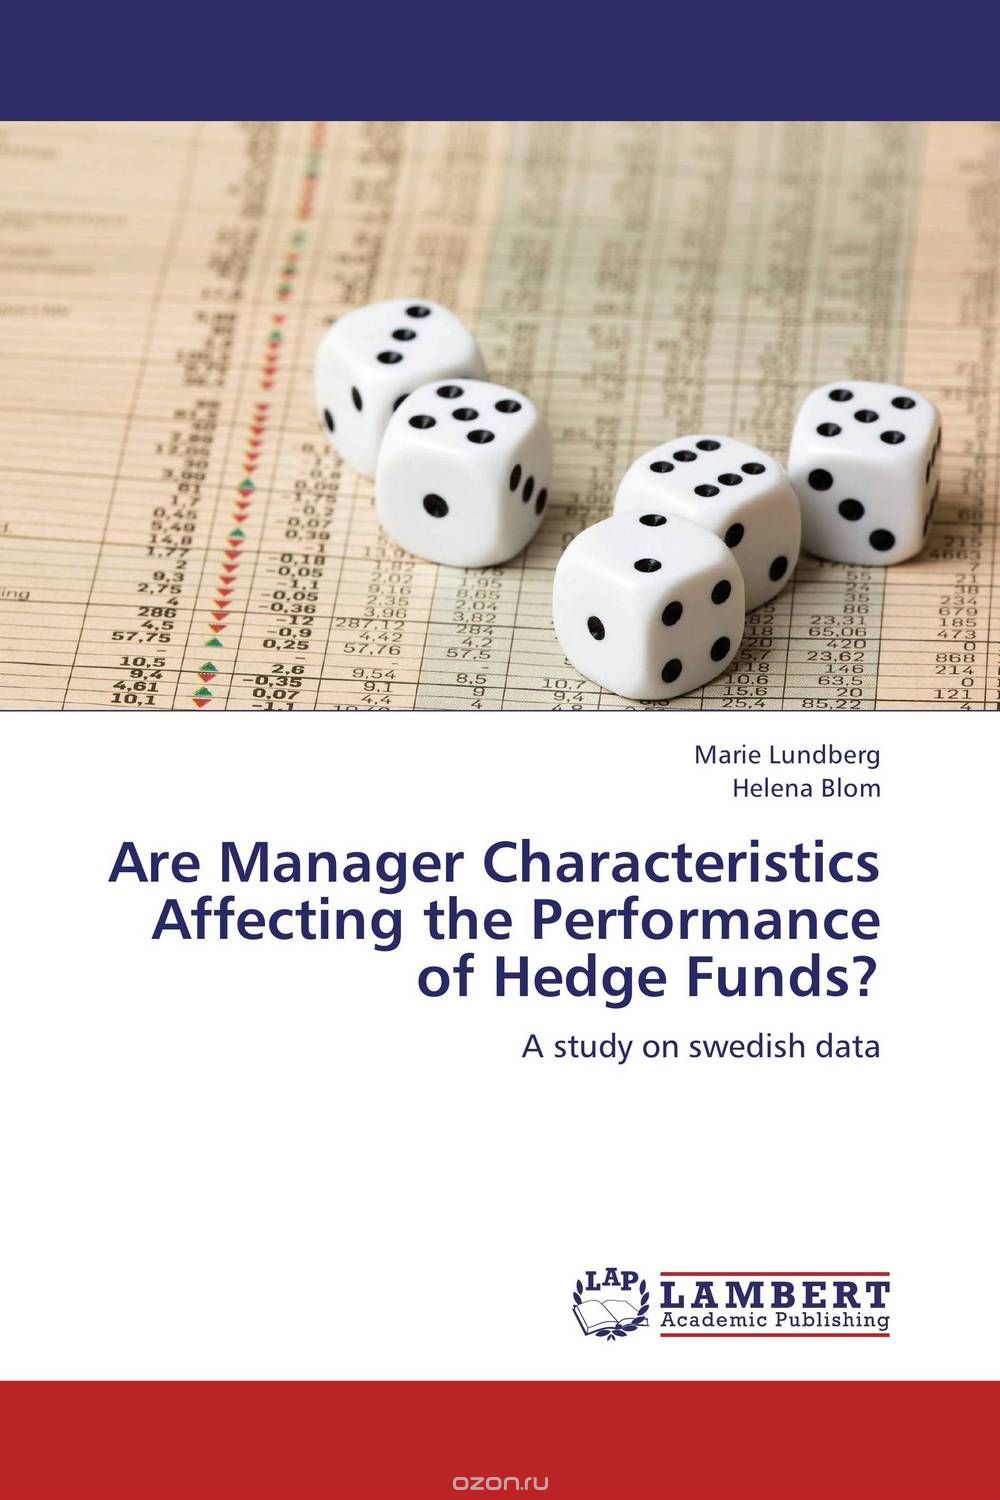 Are Manager Characteristics Affecting the Performance of Hedge Funds?